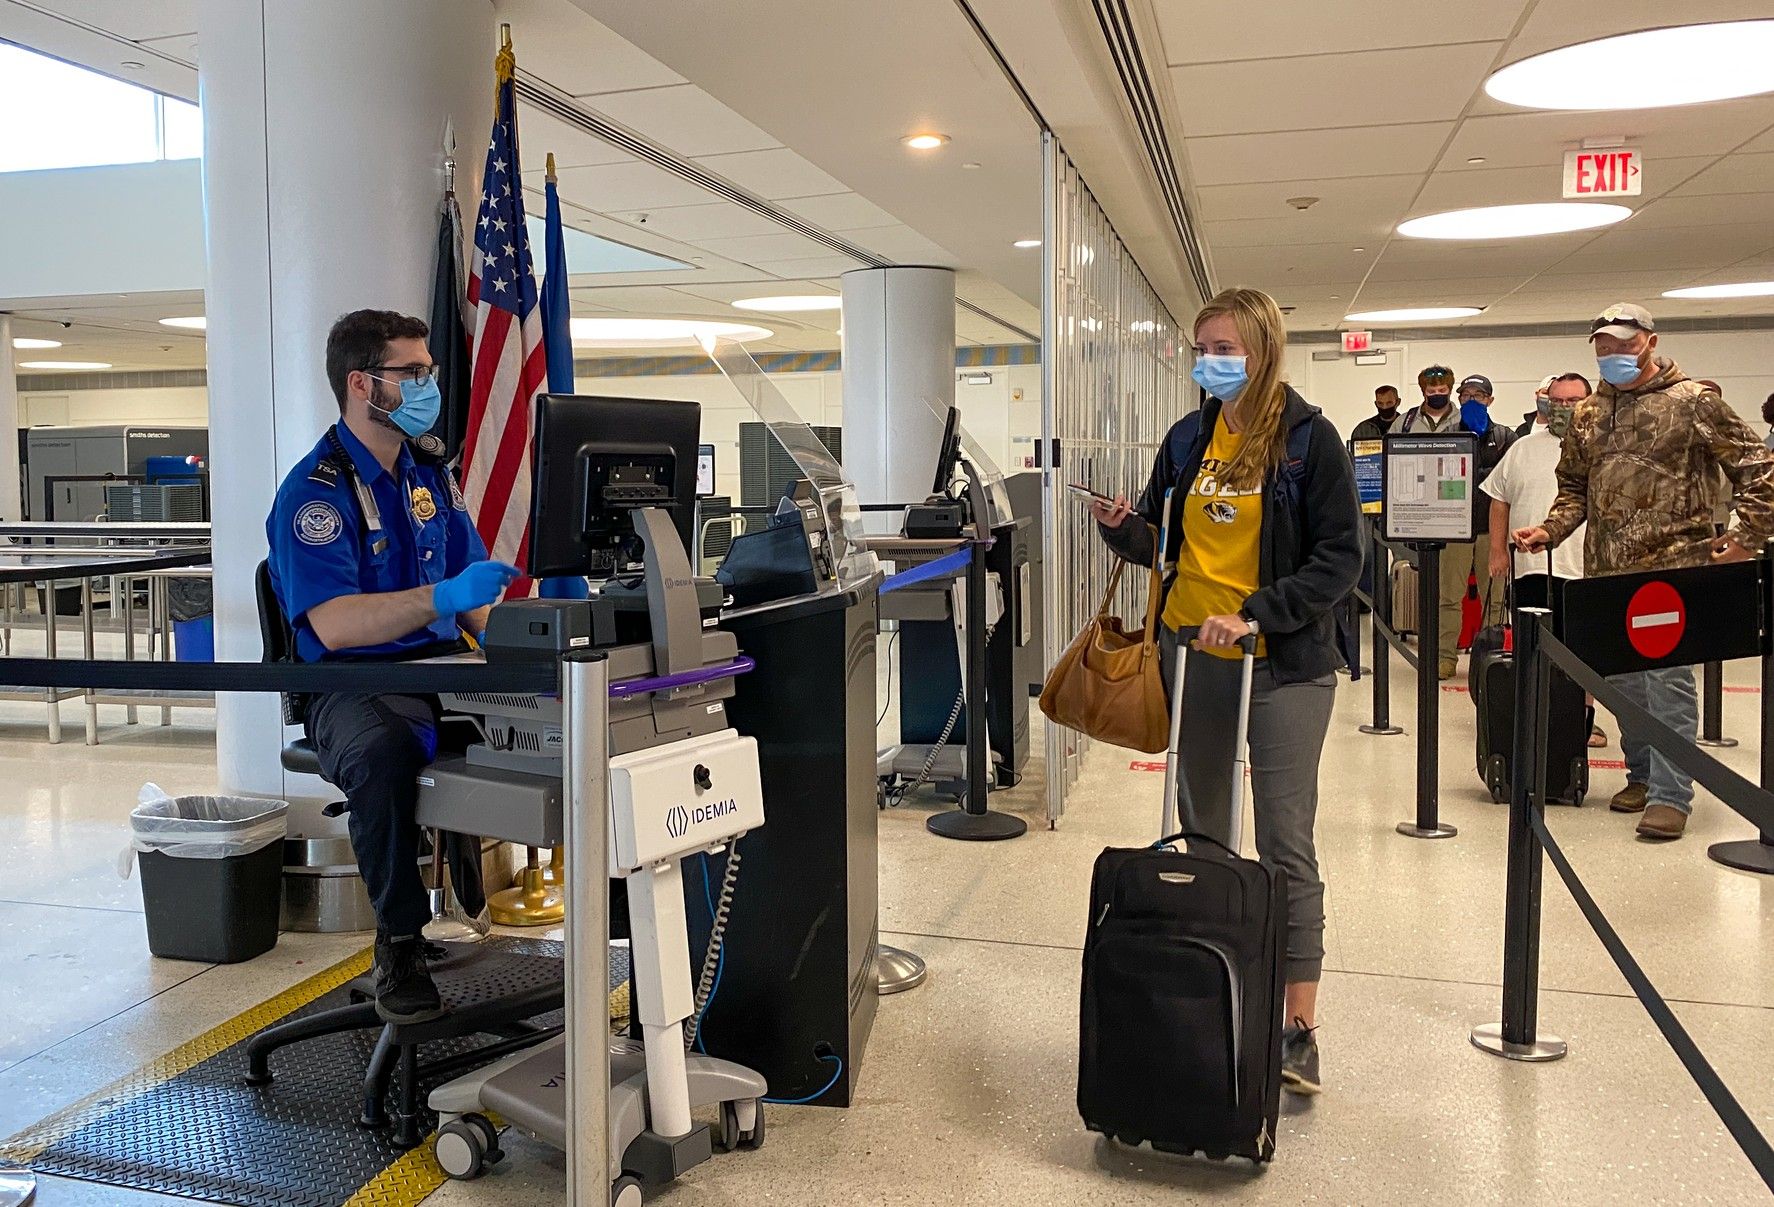 TSA employees are entitled to hazard pay during the pandemic.